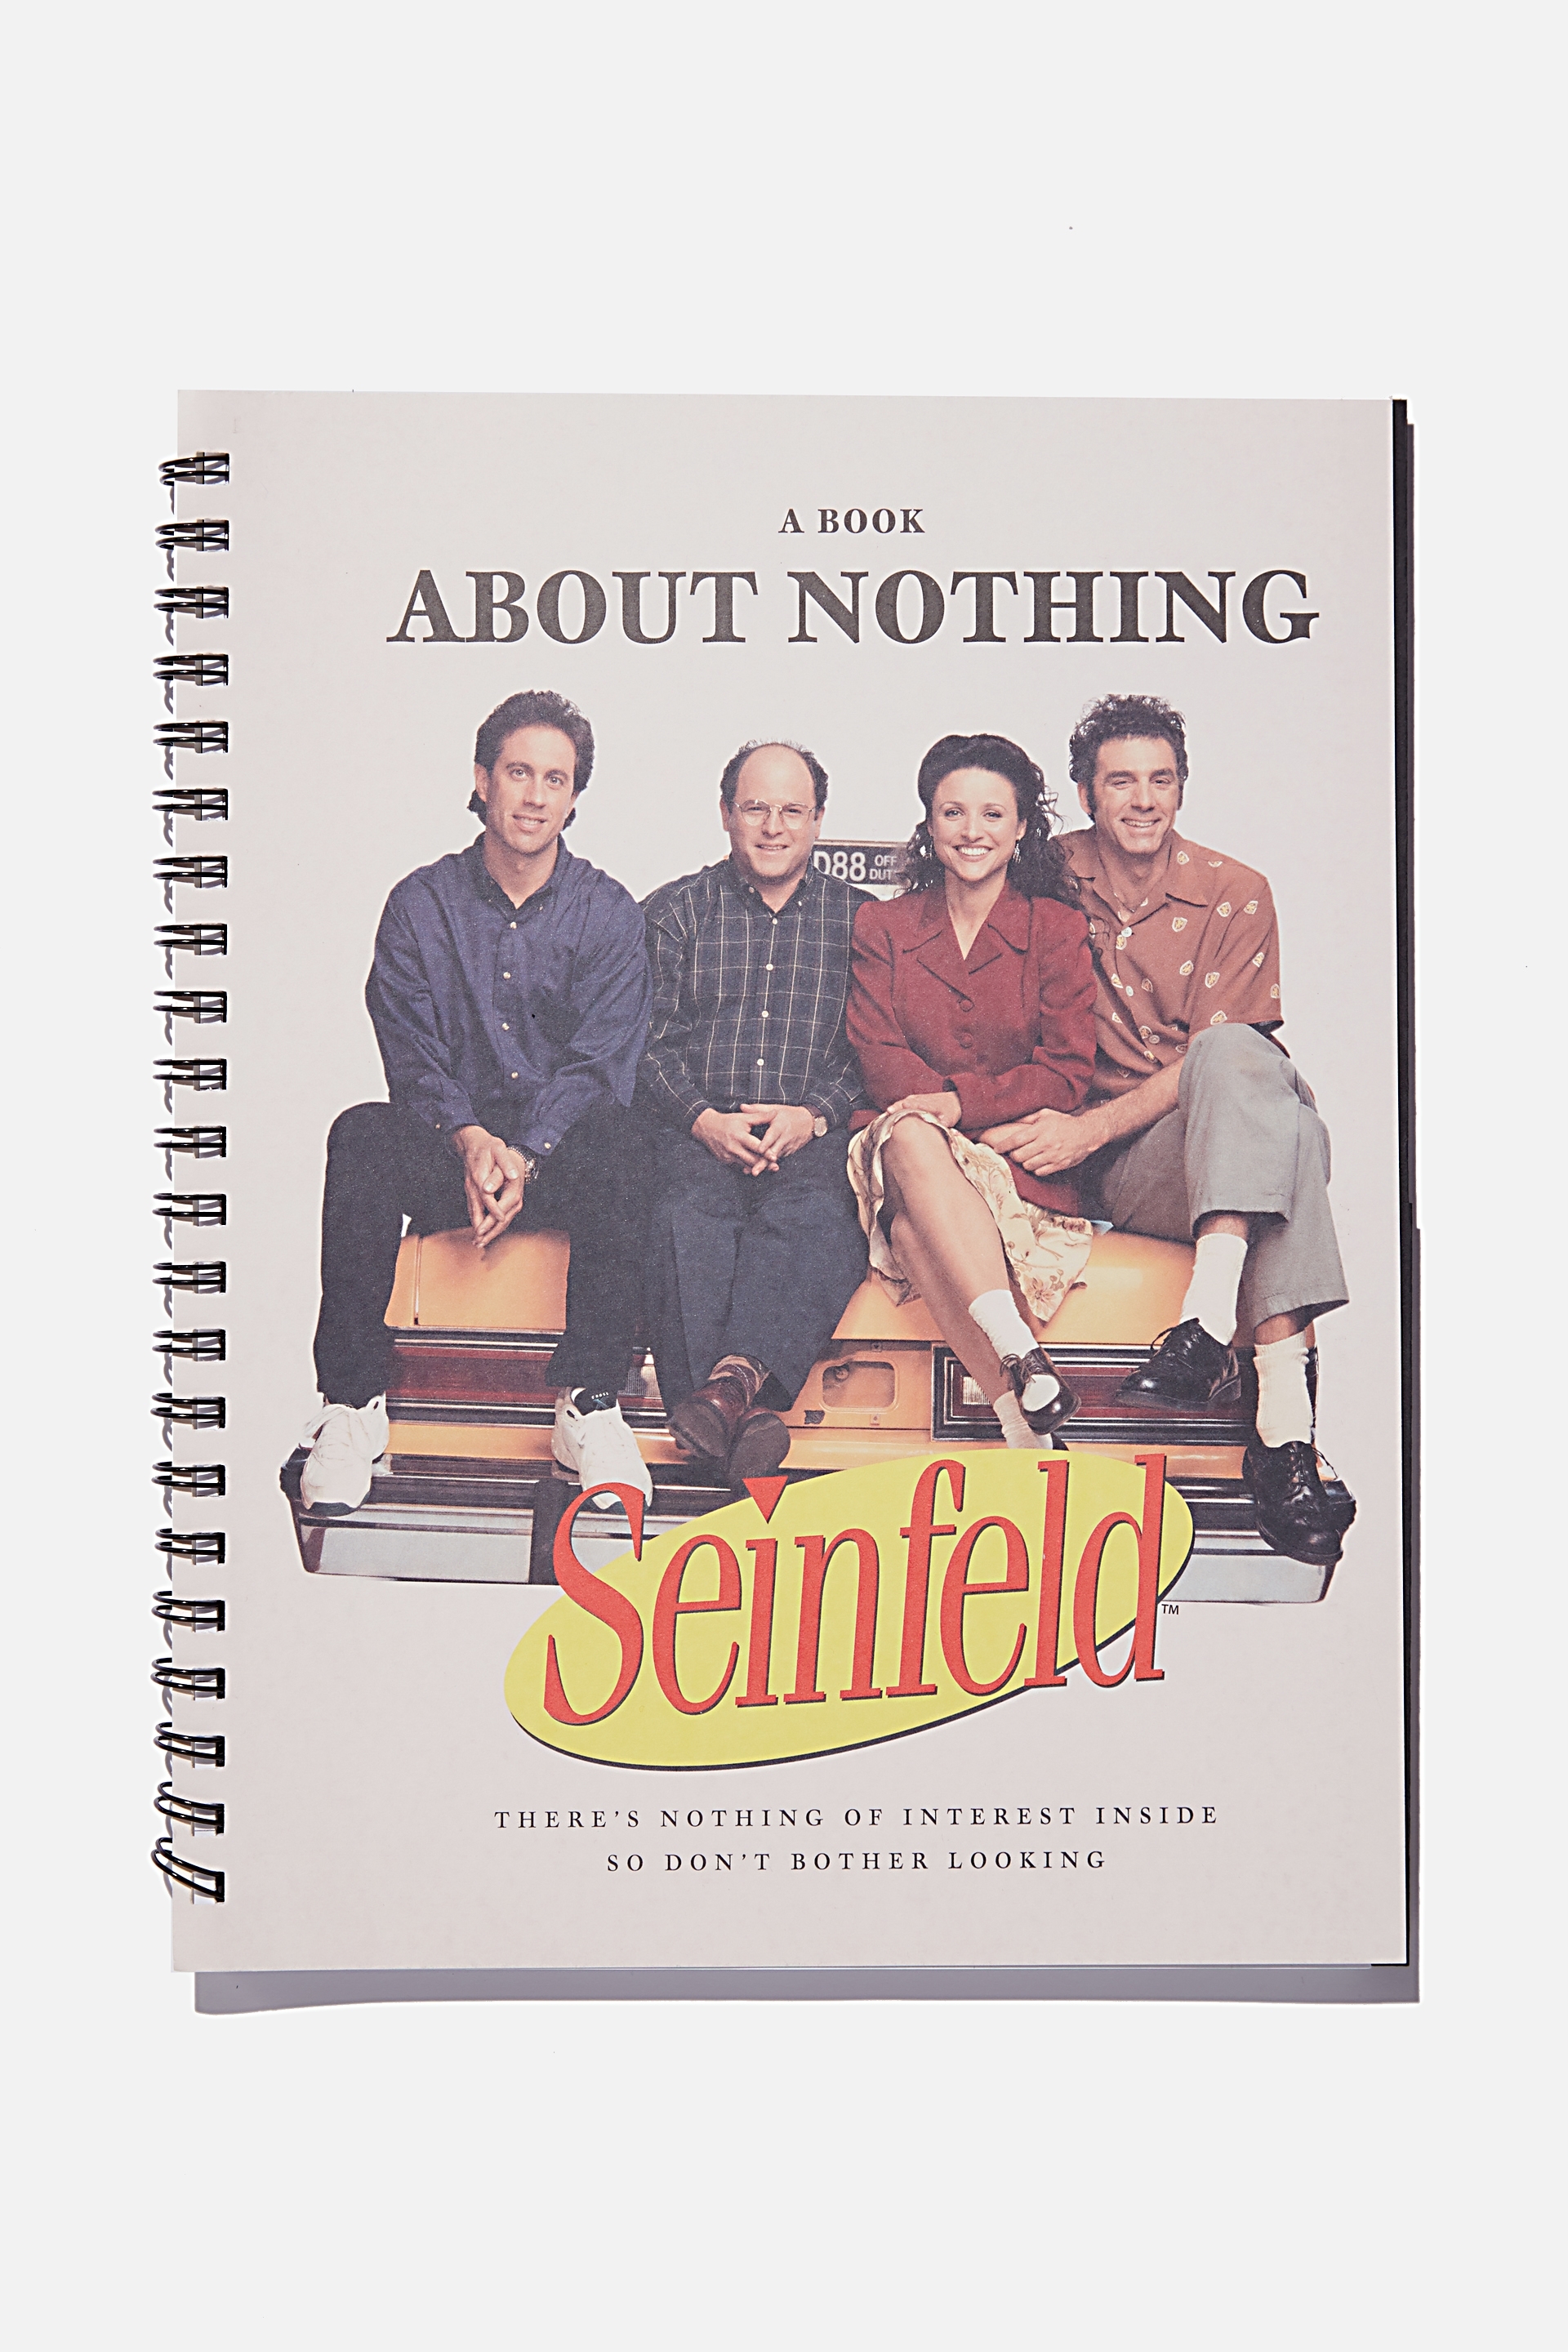 Typo - A4 Campus Notebook Recycled - Lcn wb seinfeld book about nothing